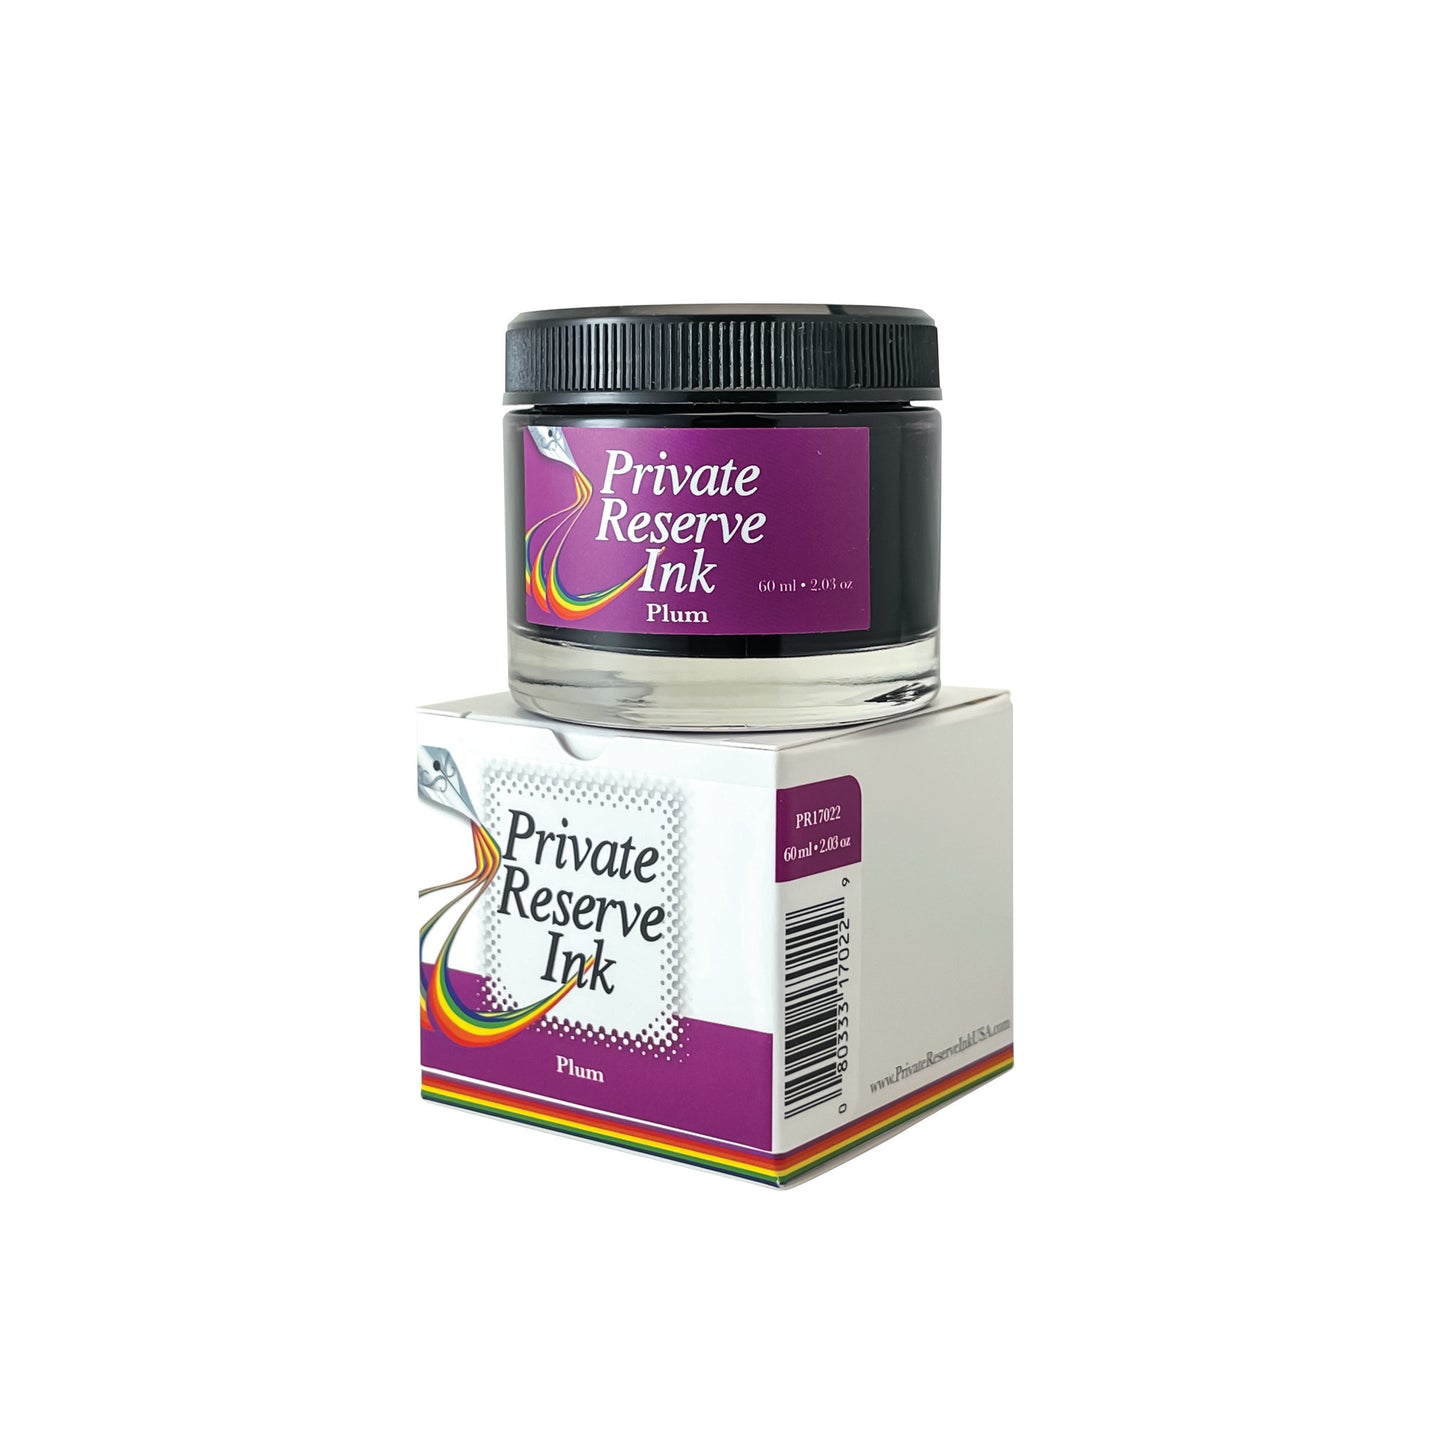 Private Reserve Plum (60ml) Bottled Ink